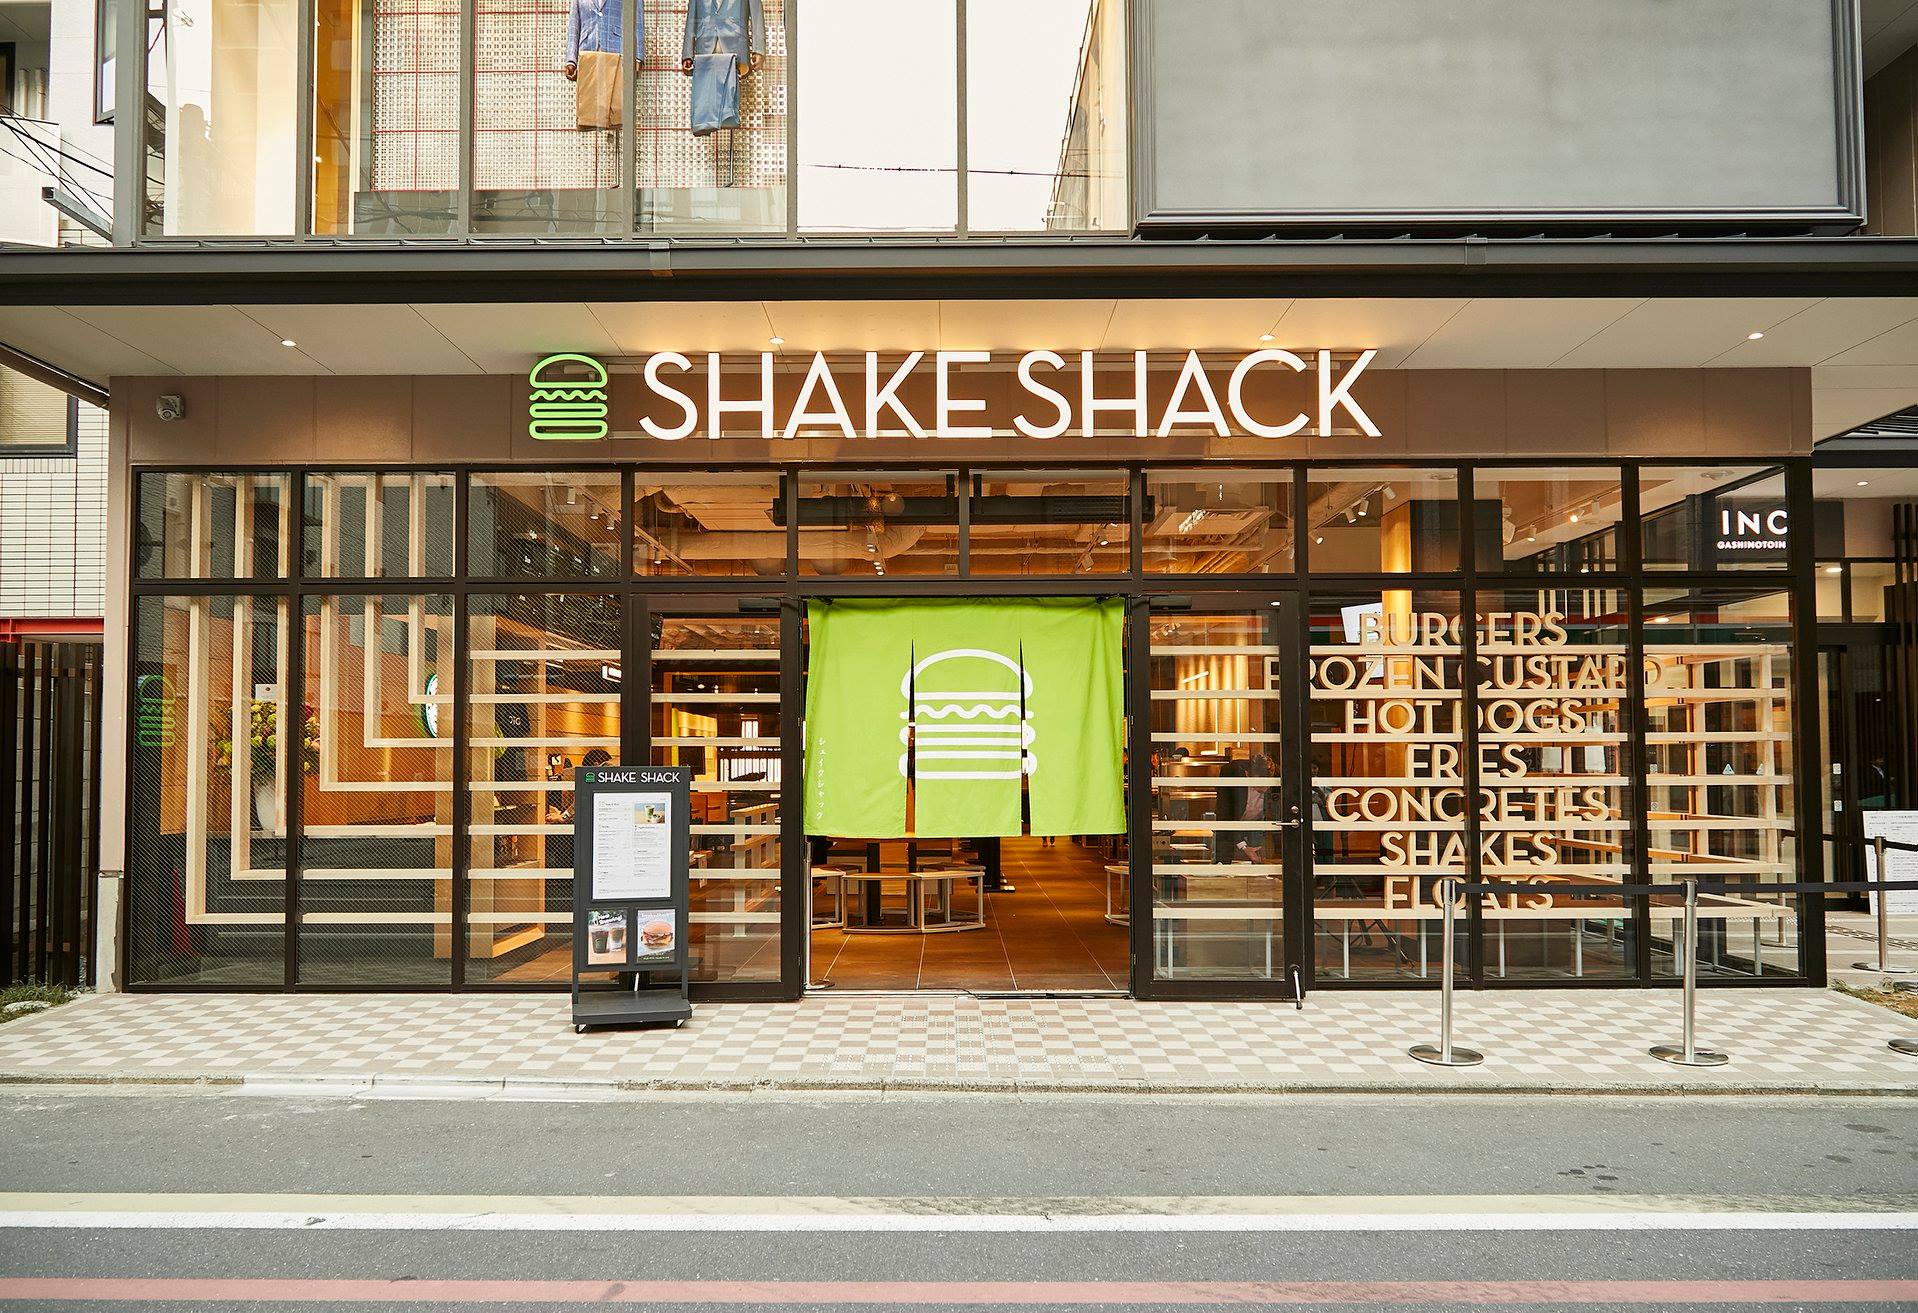 Shake Shack menu prices featuring 50 items ranging from $0.50 to $31.99